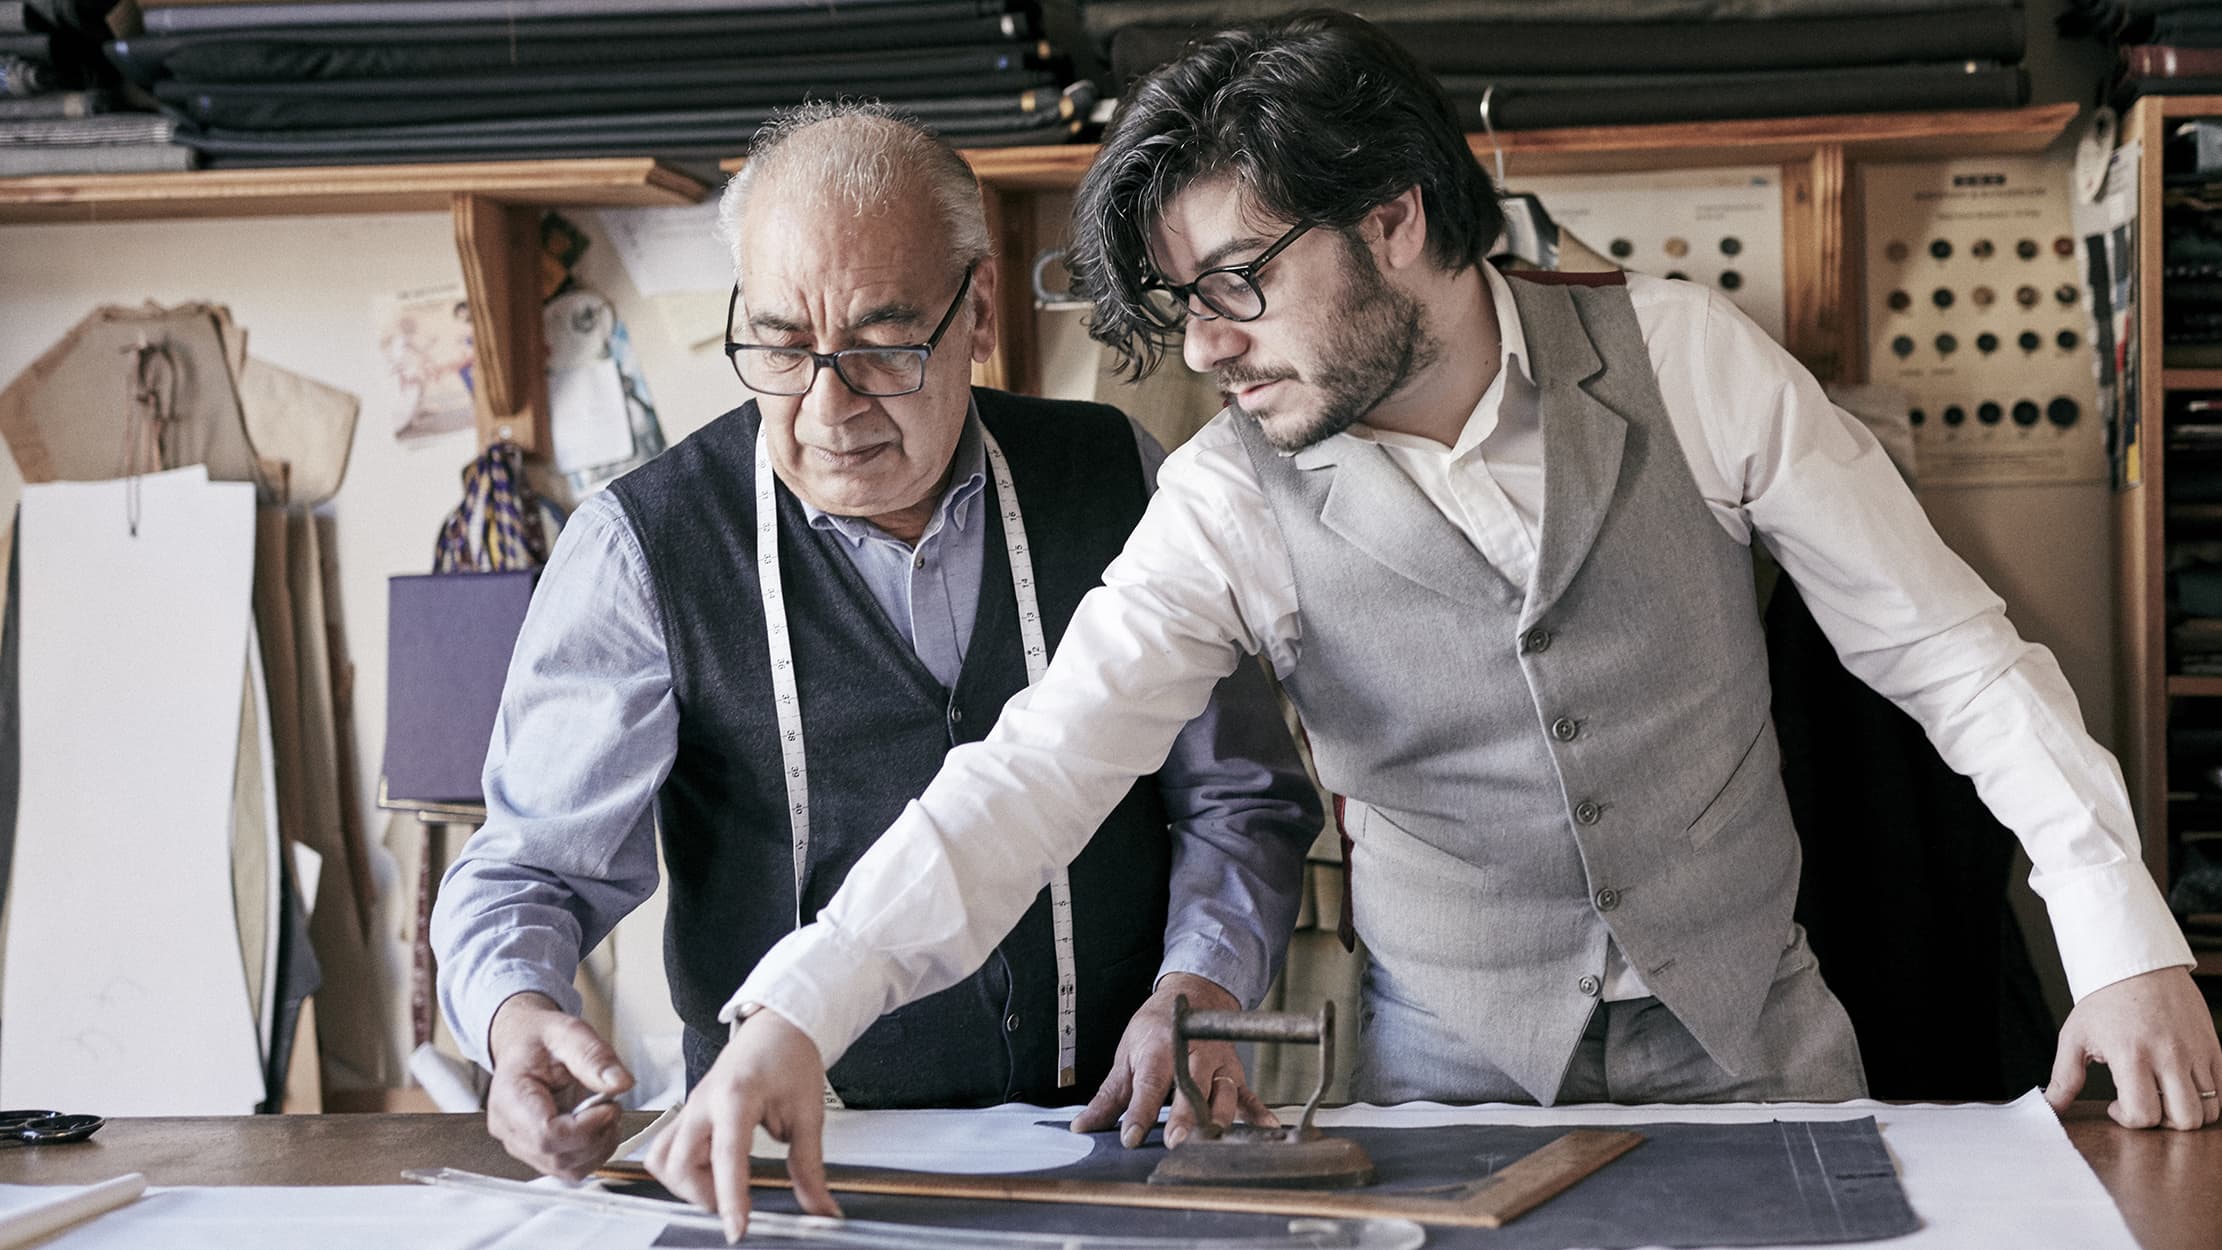 An old man and a young man drawing out plans on a table